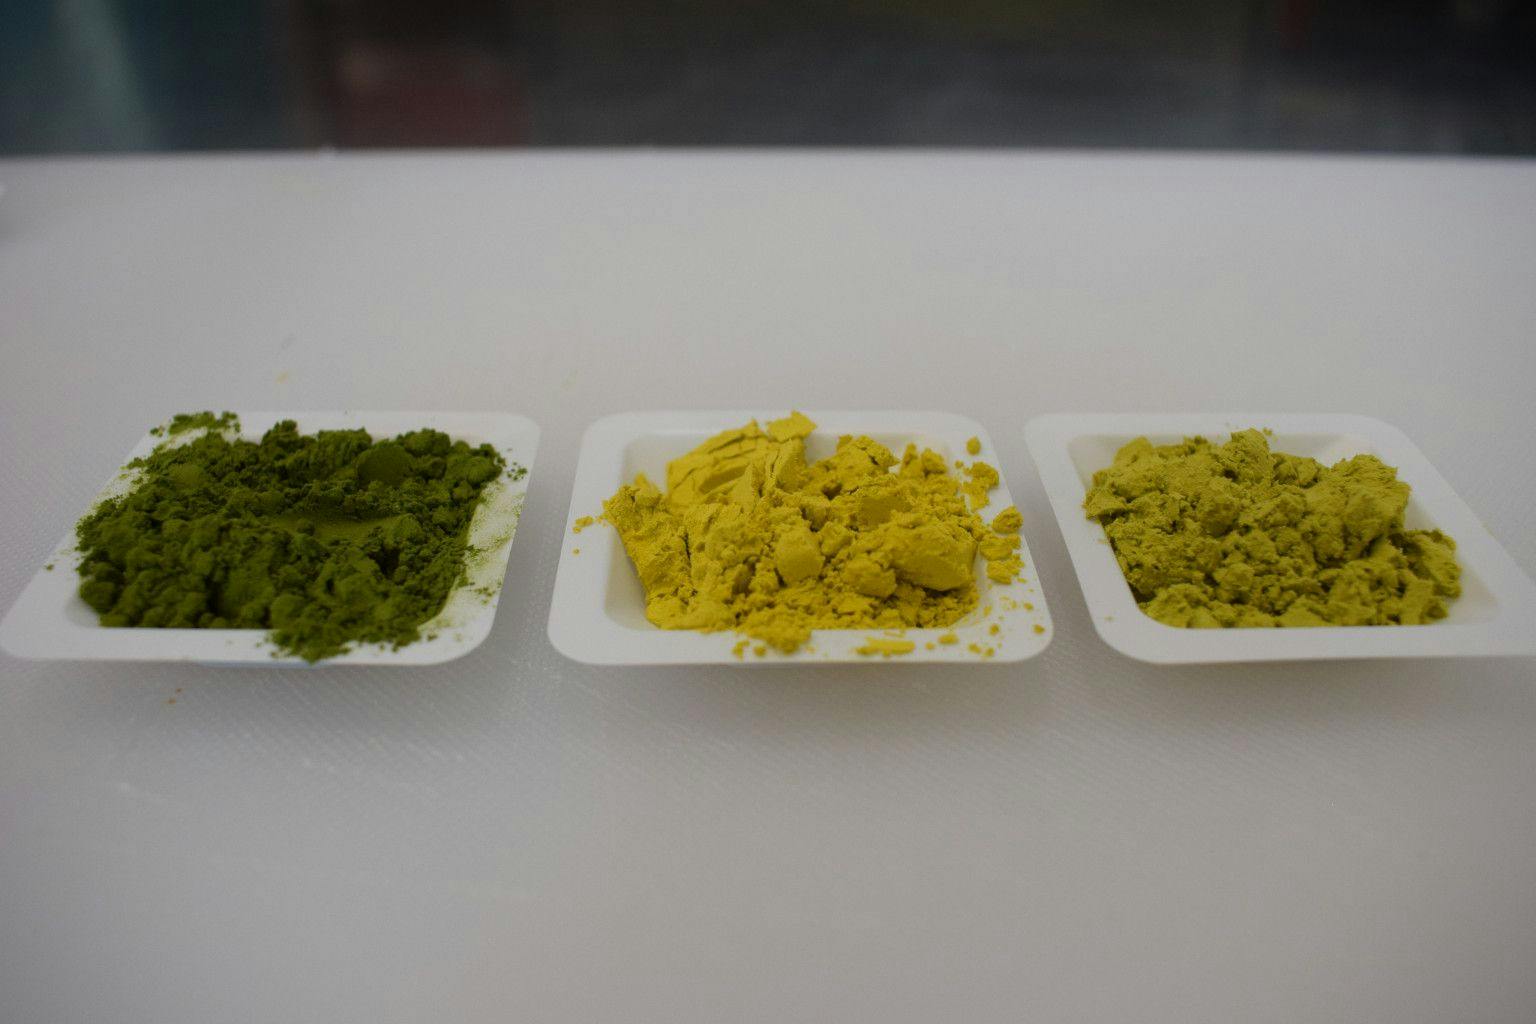 Pictured from left to right: Smooth Chlorella (left), Honey Chlorella (new version; middle), and Honey Chlorella (old version; right). Photo from ProFuture © Marie-Christin Baune (DIL-ev).